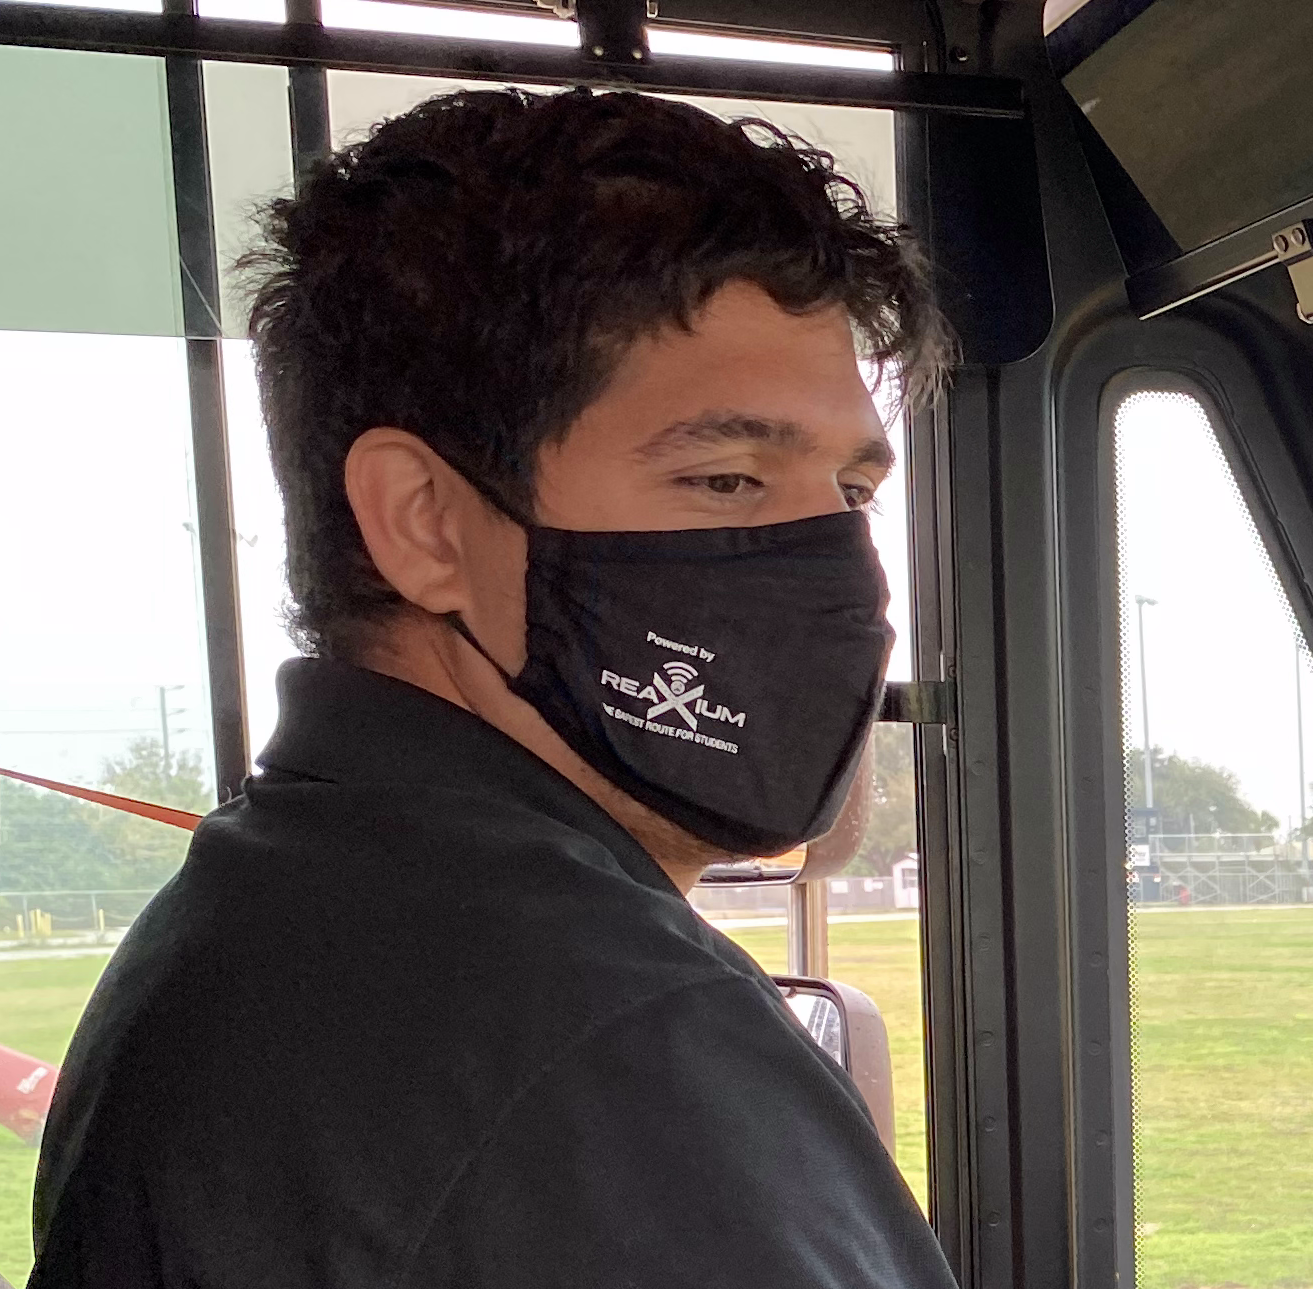 School Bus driver with mask